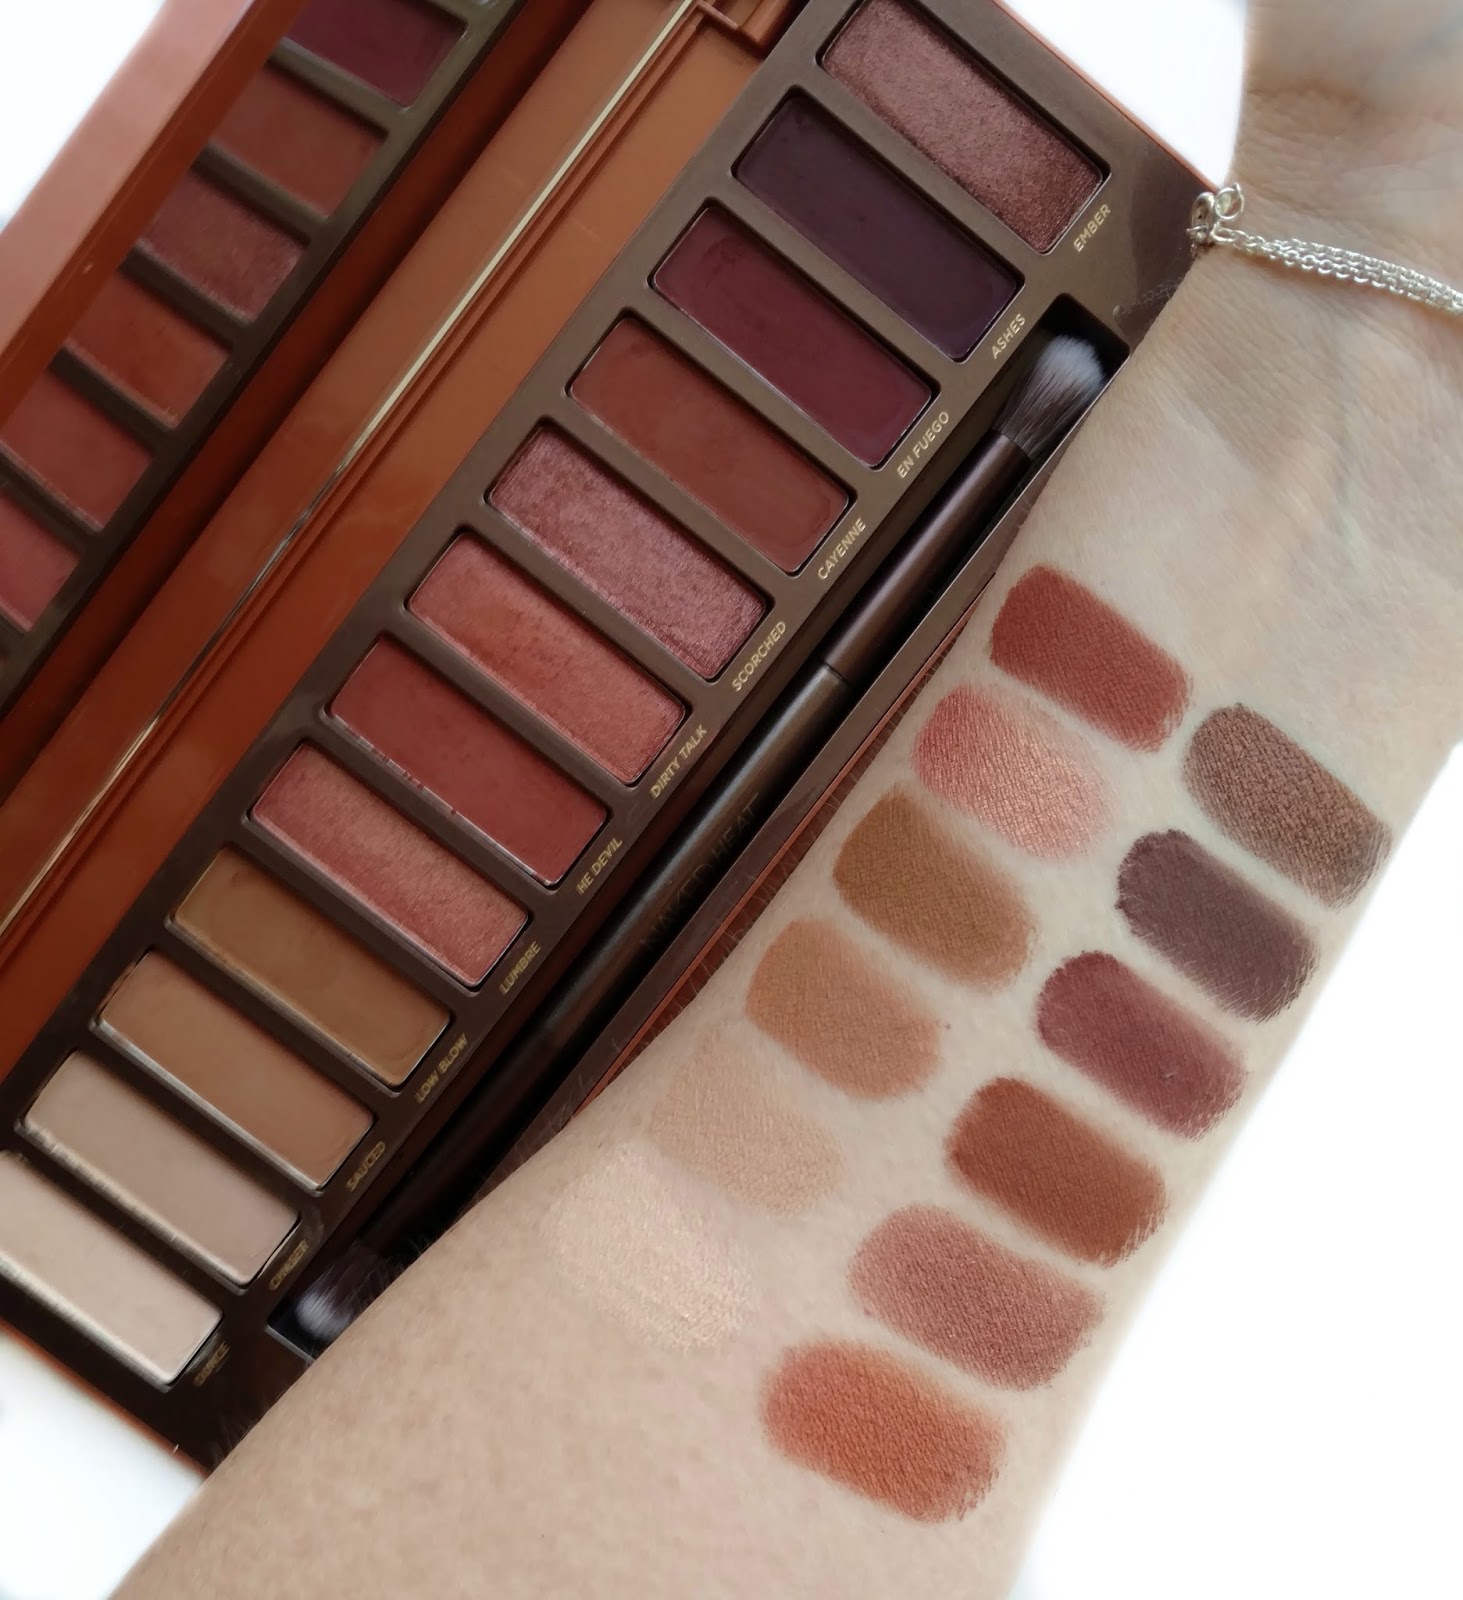 URBAN DECAY NAKED HEAT PALETTE REVIEW, DEMO AND SWATCHES 